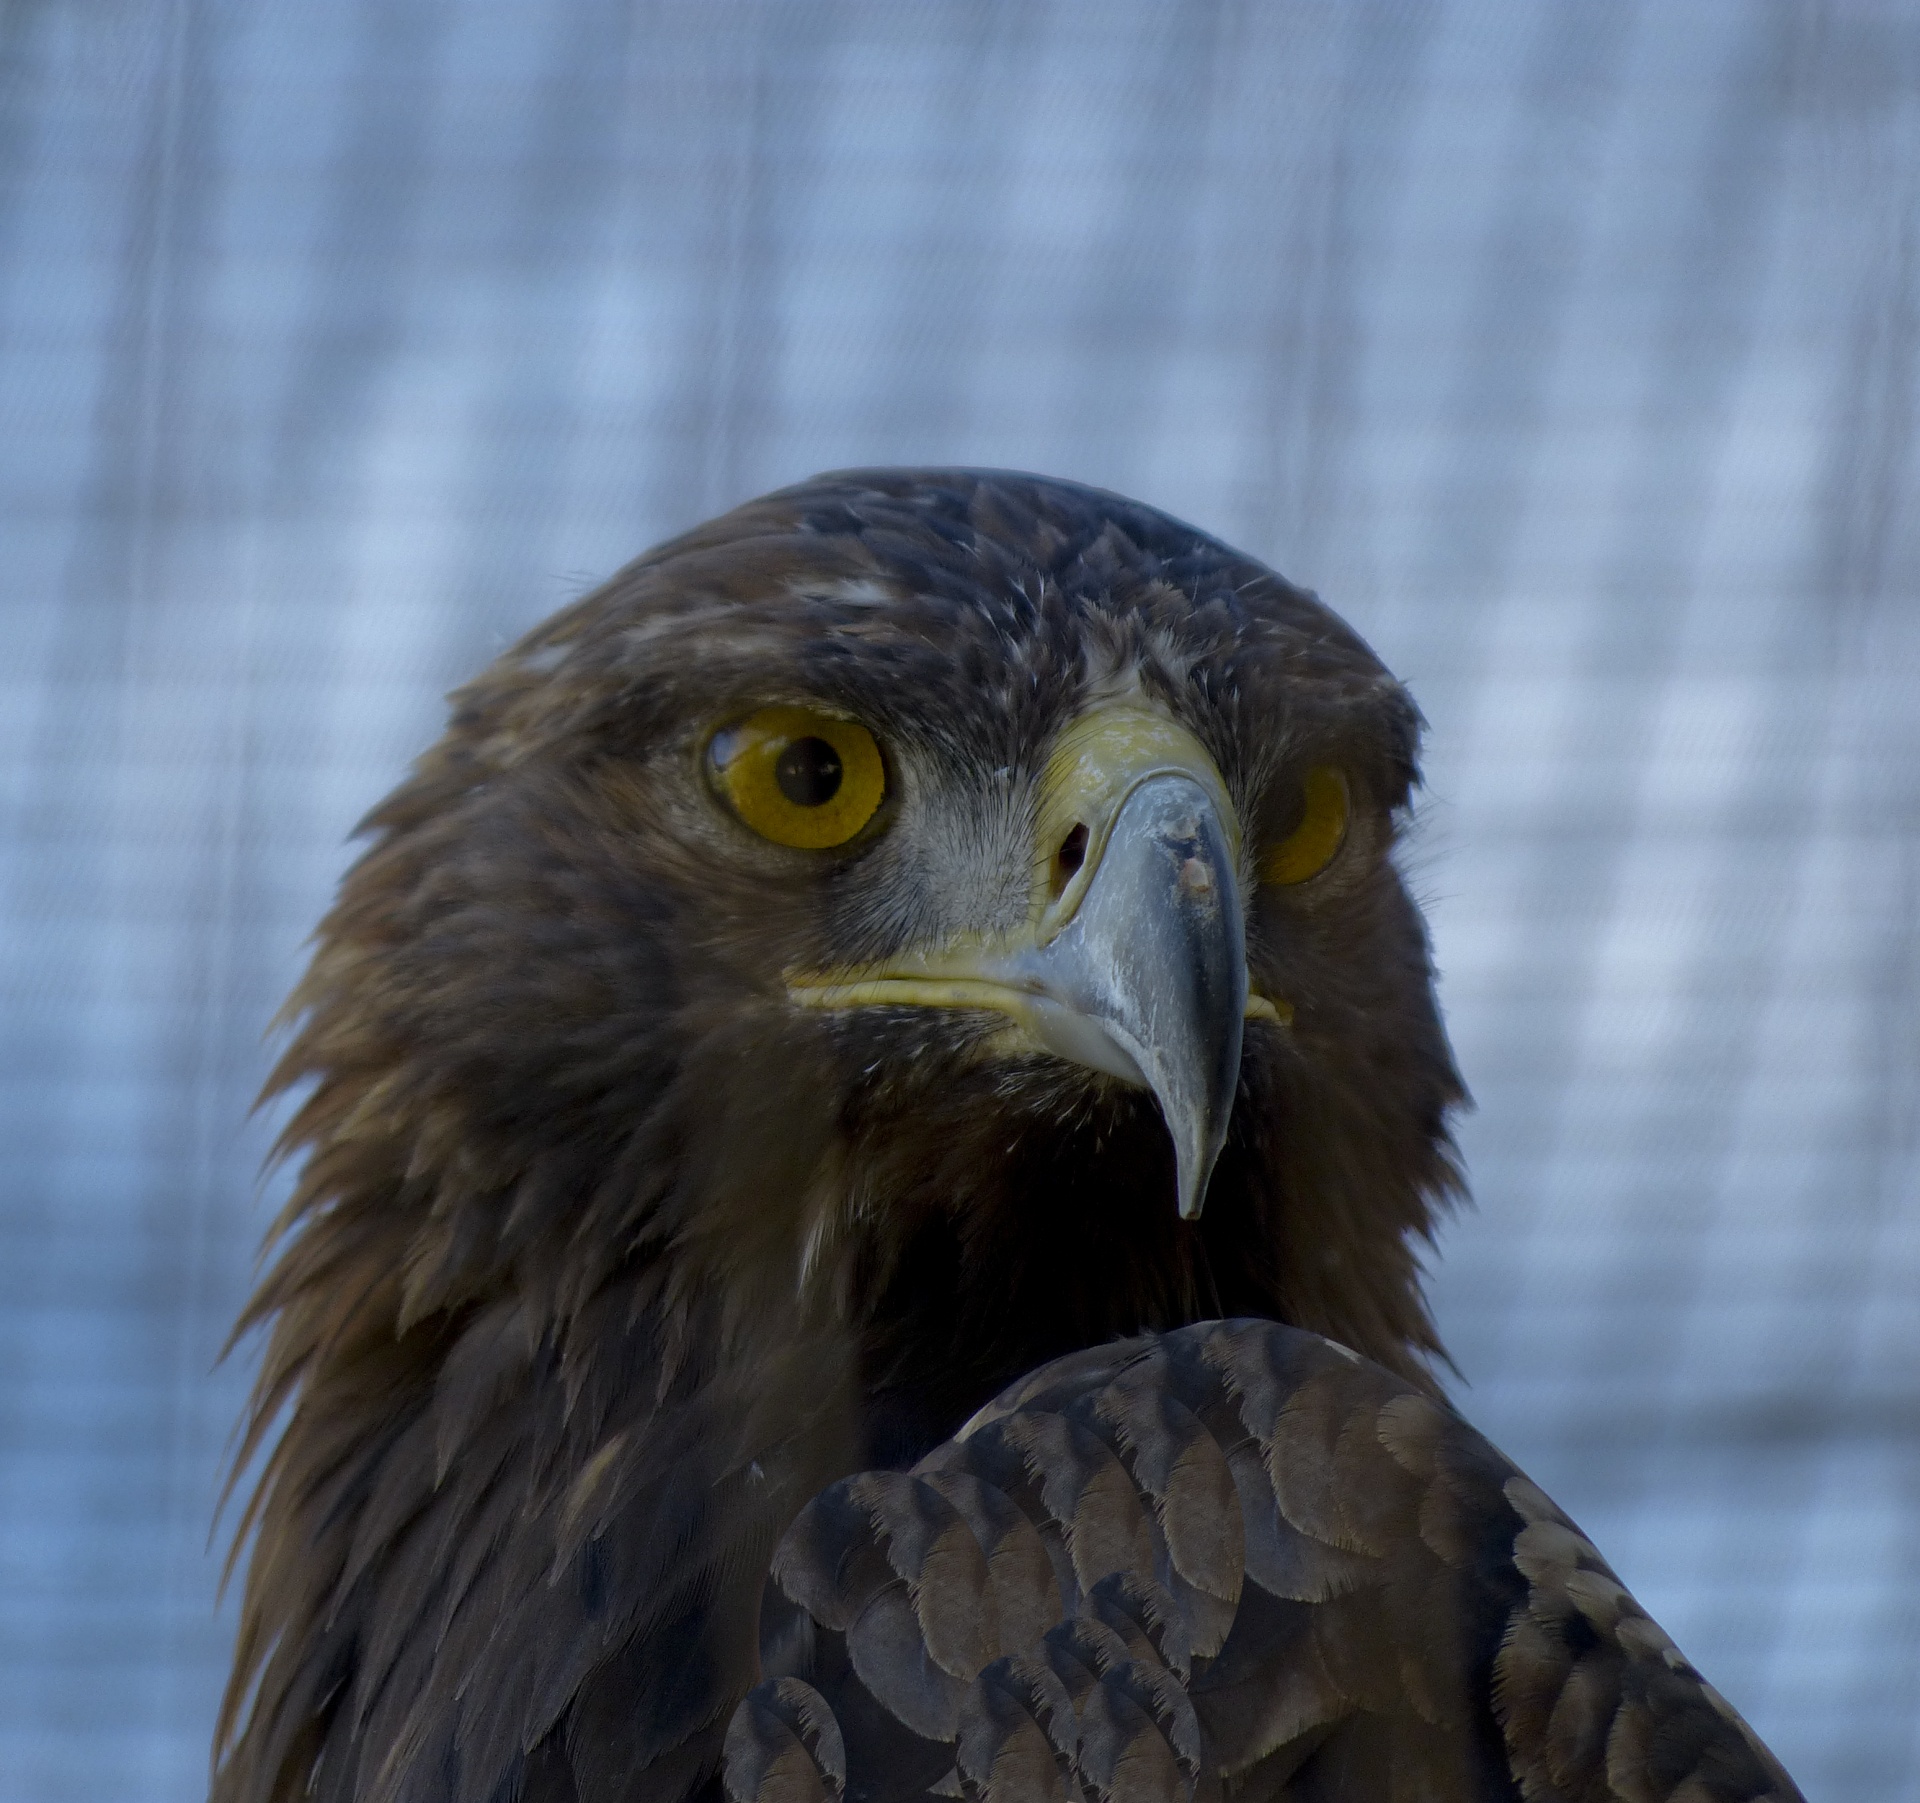 Zooeagleheadshotgolden Eaglebrown Free Image From